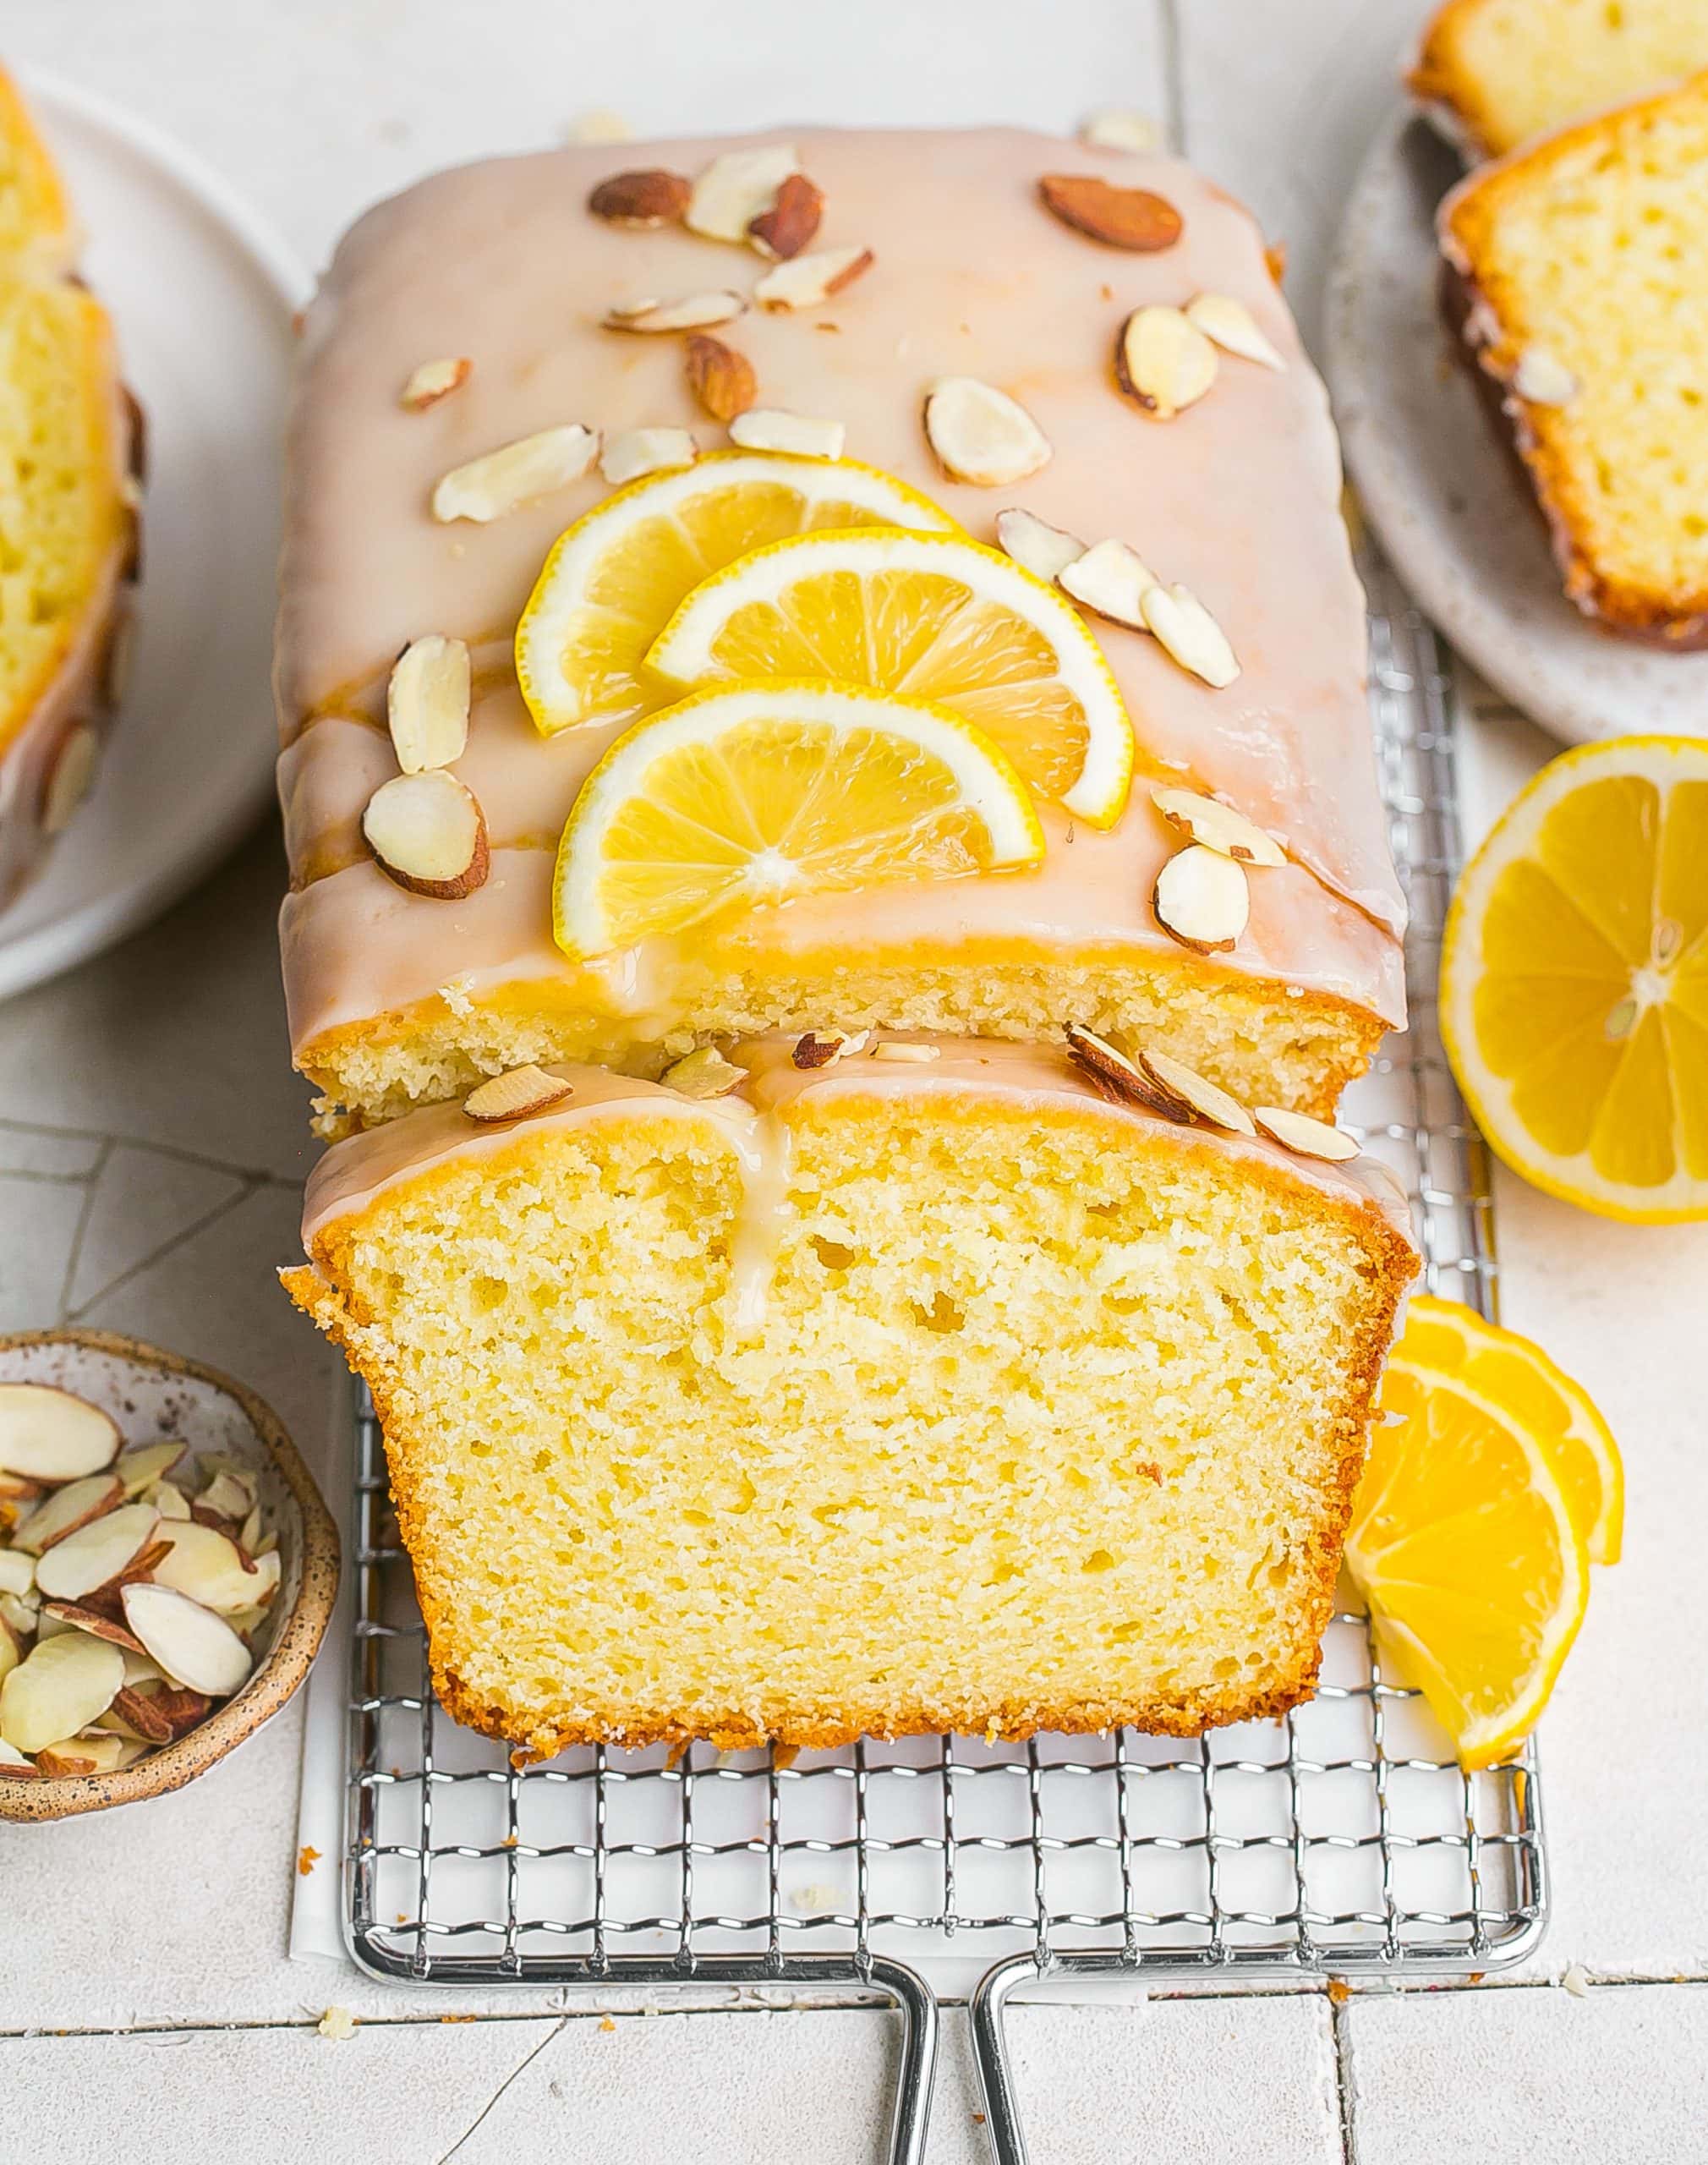 Loaf cake with sliced almonds and lemons.